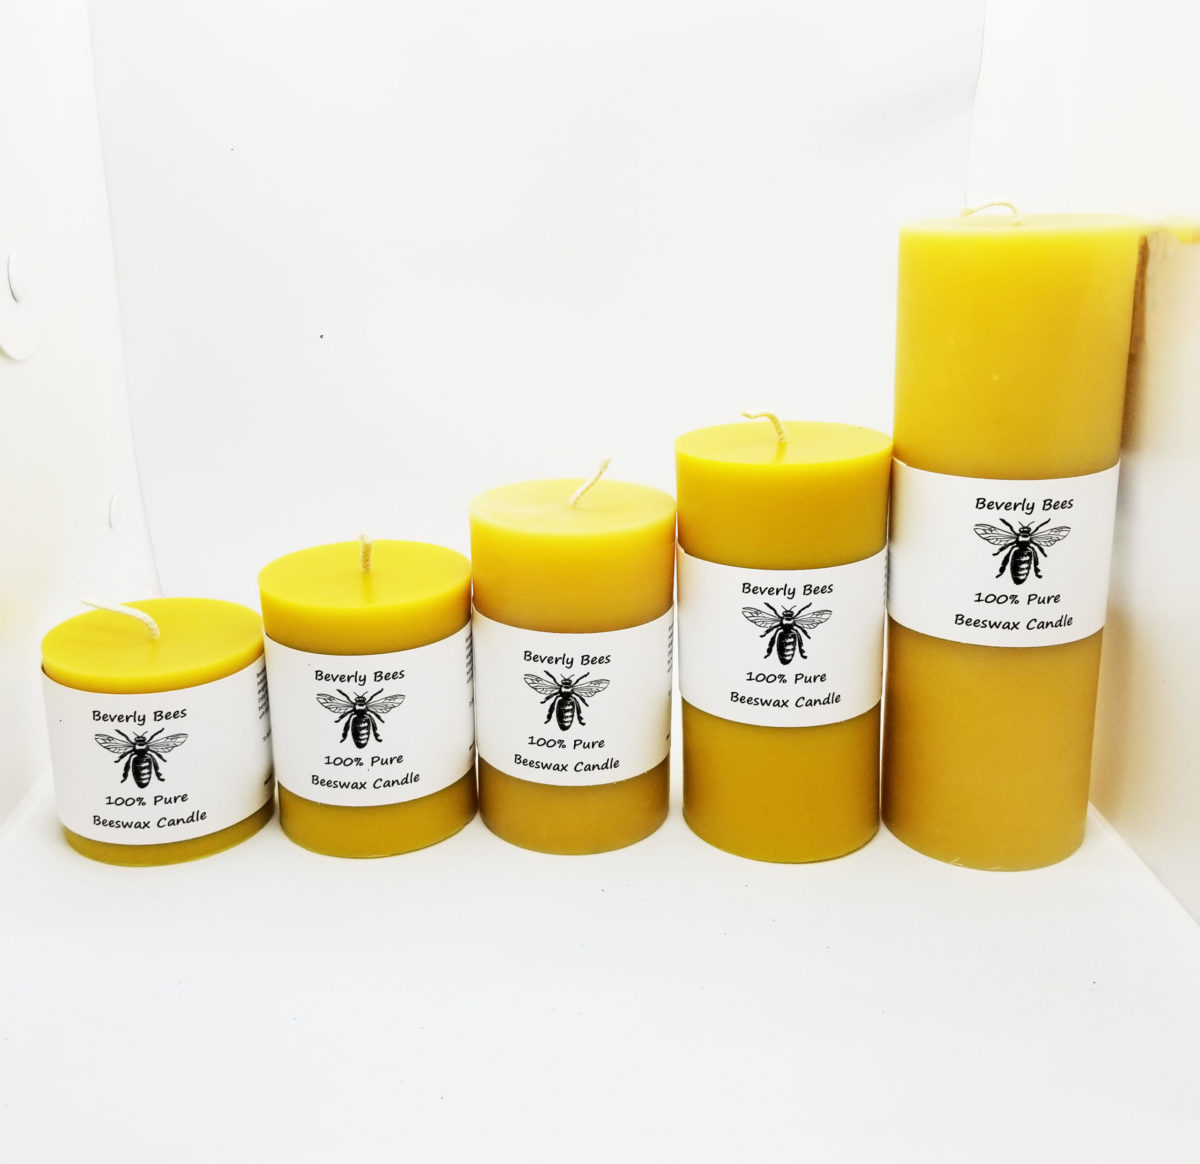 Black Beeswax Gift Set 3 Colored Pillar Beeswax Candles with Honey Scent and Hand-Made Charm for Gift and Home Decor Size 3.3 x 1.8 in